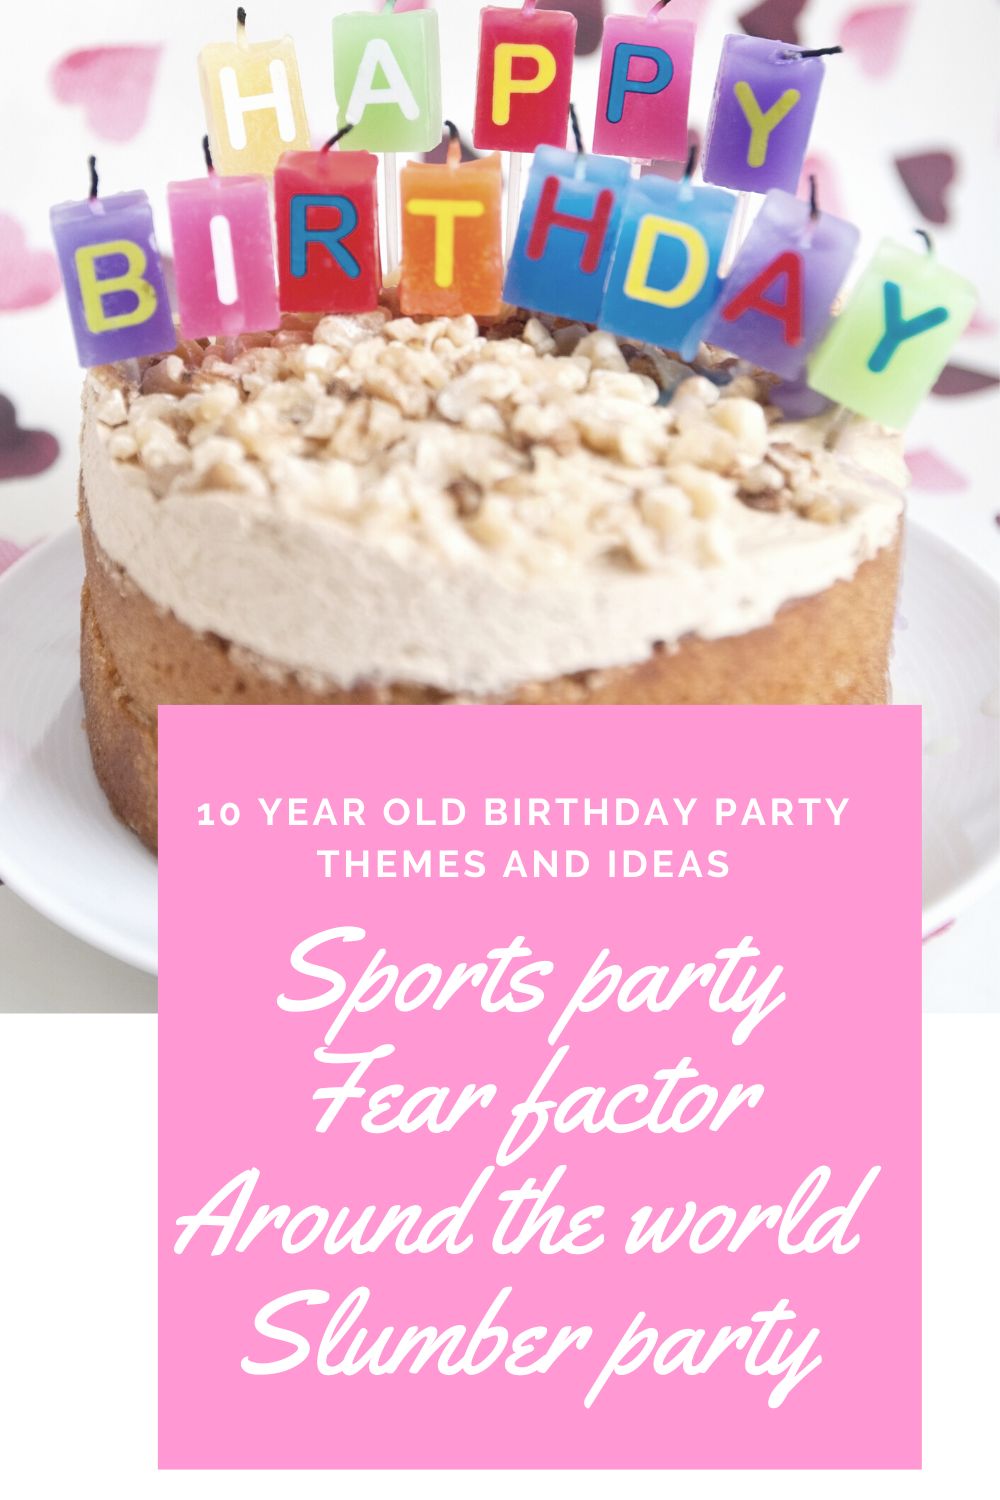 10 Year old birthday party themes and ideas